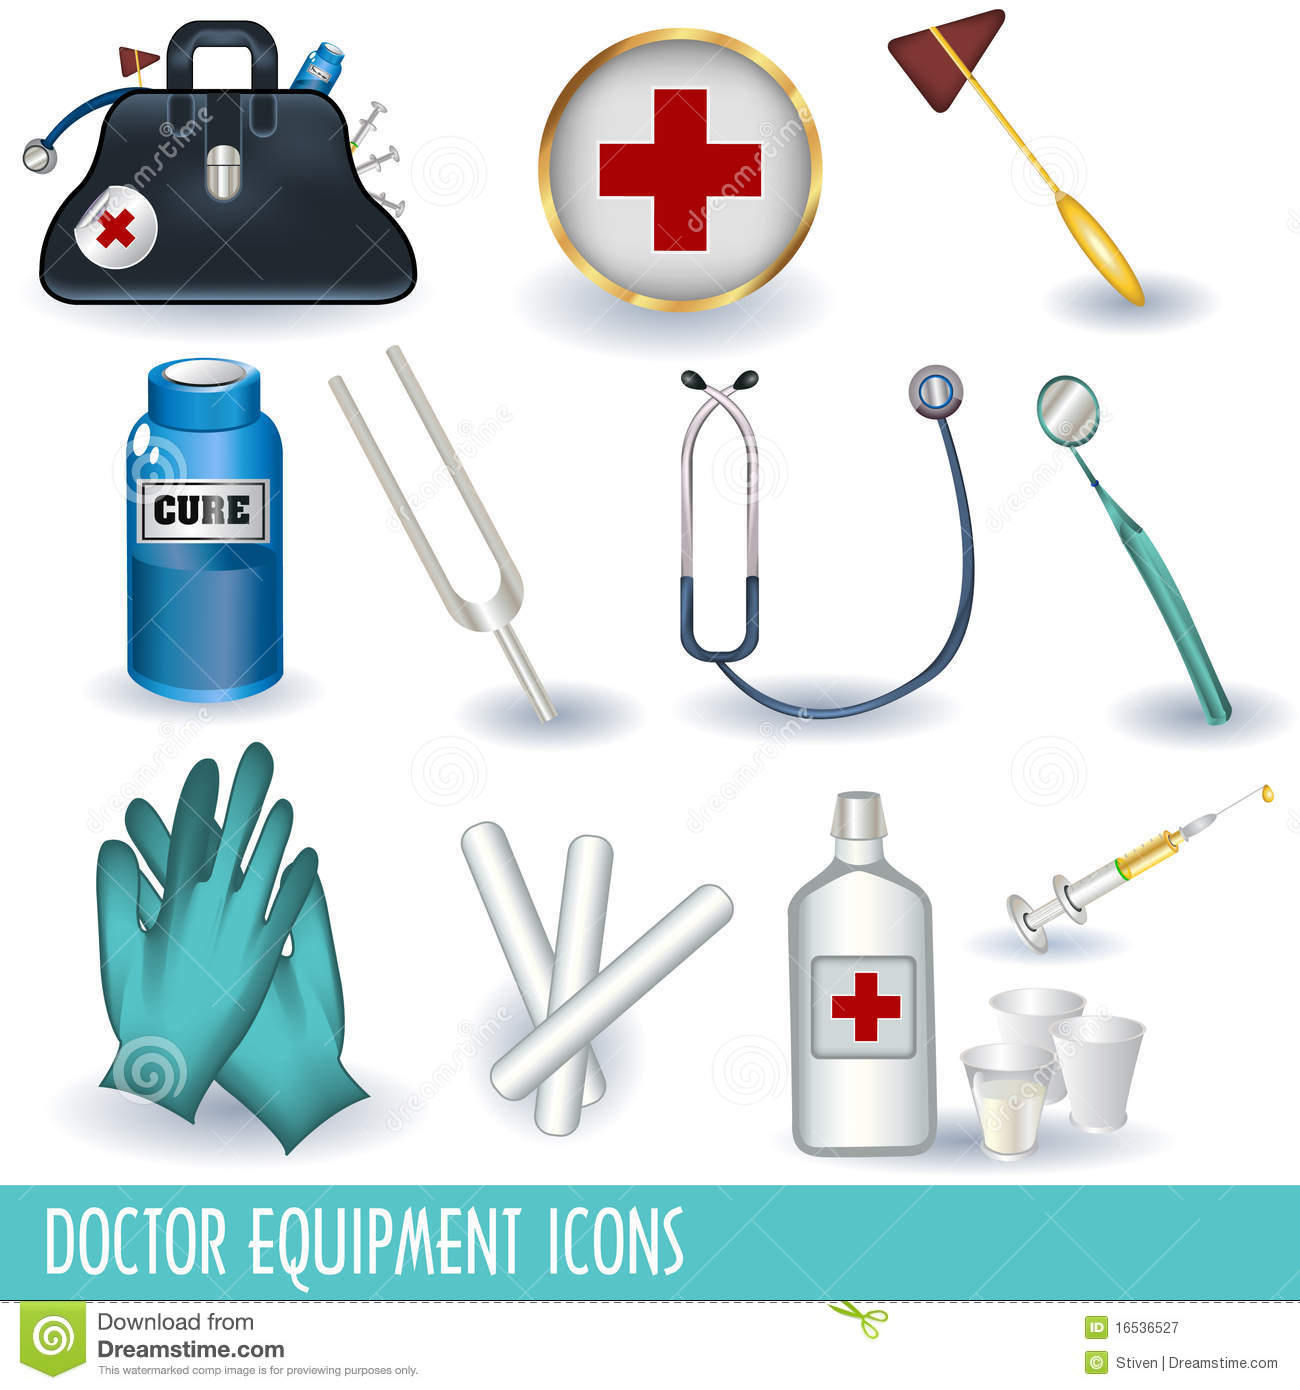 Nurse Tools And Equipment Clipart Doctor Equipment Icons